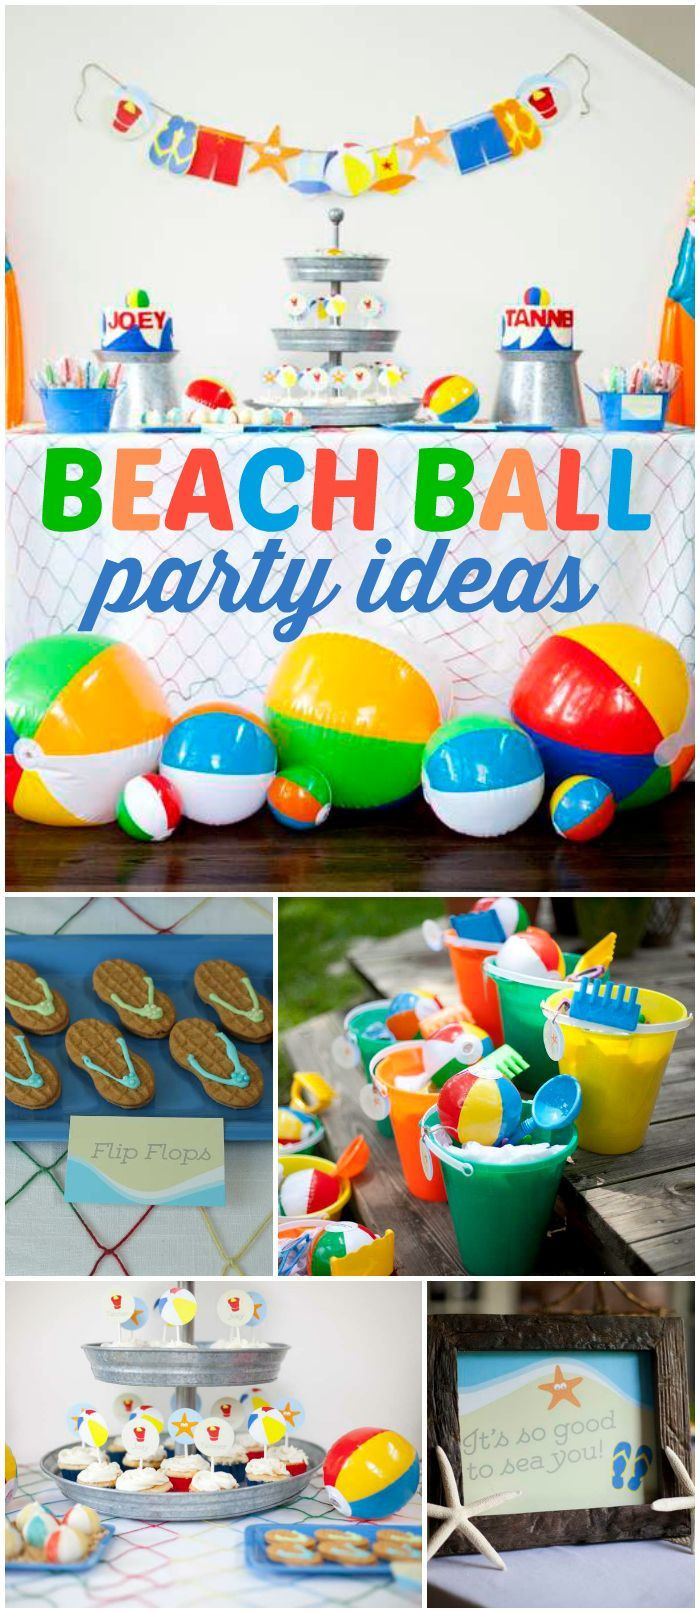 Summer Beach Theme Party Ideas
 17 Best images about Birthday Party Ideas on Pinterest